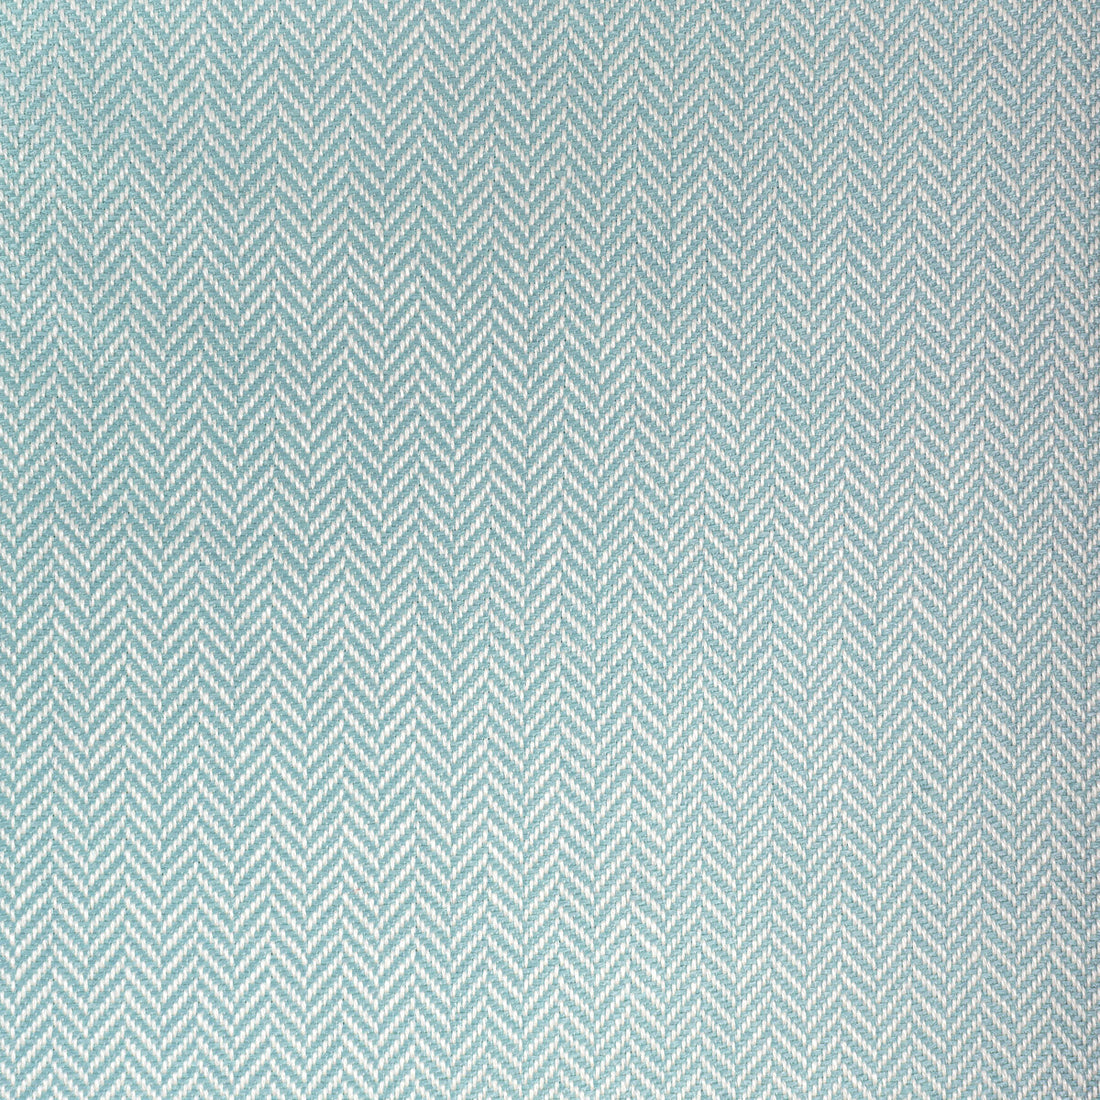 Kerolay Linen Weave fabric in aqua color - pattern 8022107.13.0 - by Brunschwig &amp; Fils in the Lorient Weaves collection